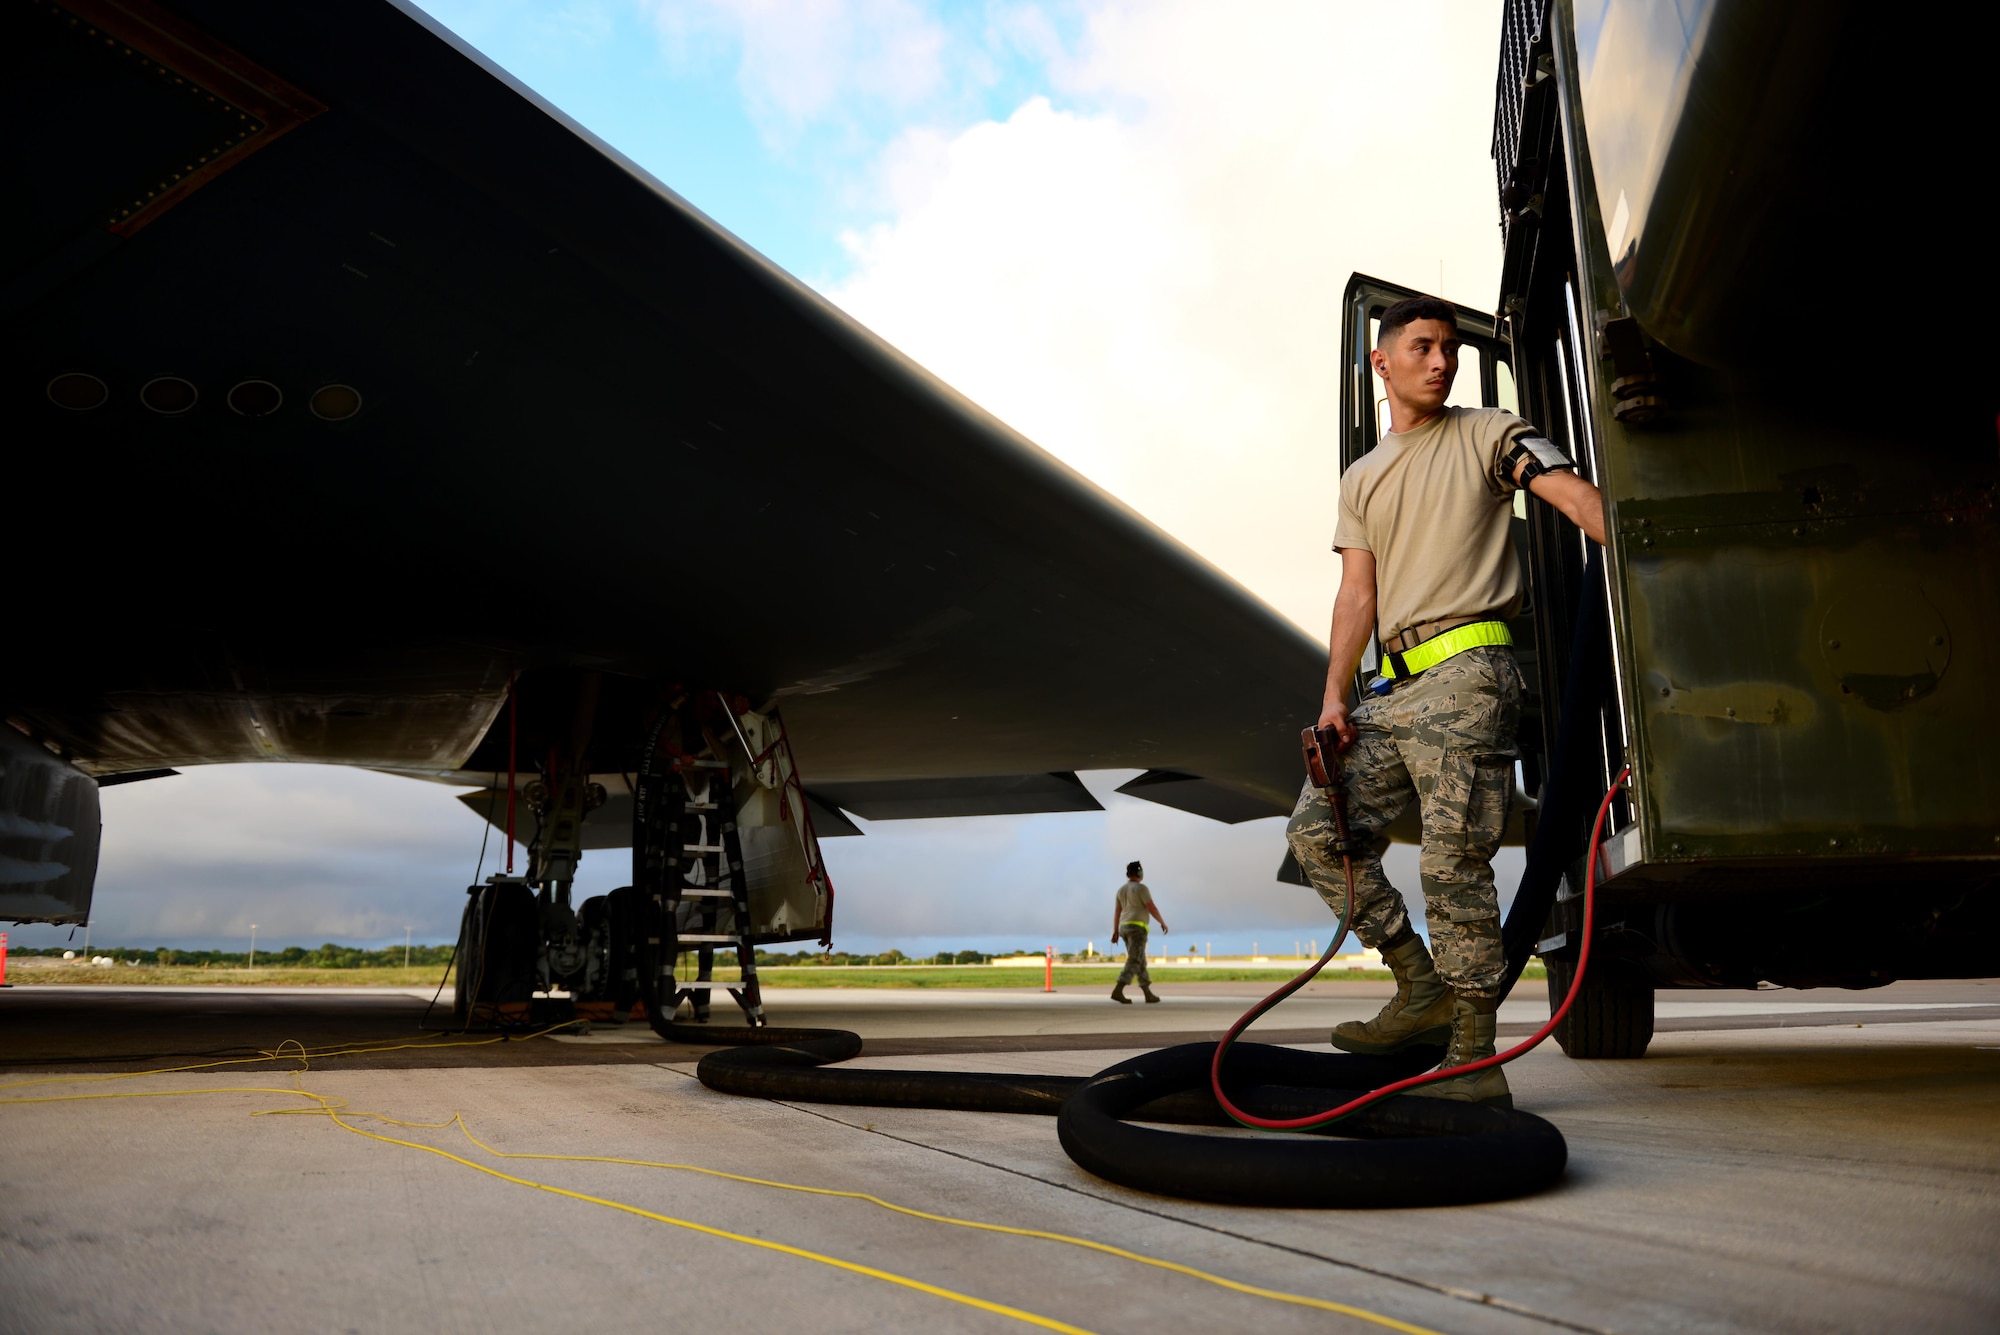 U.S. Air Force Airman 1st Class Armando Torres, a fuels distribution technician assigned to the 509th Logistics Readiness Squadron, monitors the control panel to ensure he maintains proper nozzle pressure and revolutions per minute while refueling a B-2 Spirit at Andersen Air Force Base, Guam, Jan. 17, 2017. The refueling operations are capable of delivering up to 600 gallons per minute. (U.S. Air Force photo by Airman 1st Class Jazmin Smith)